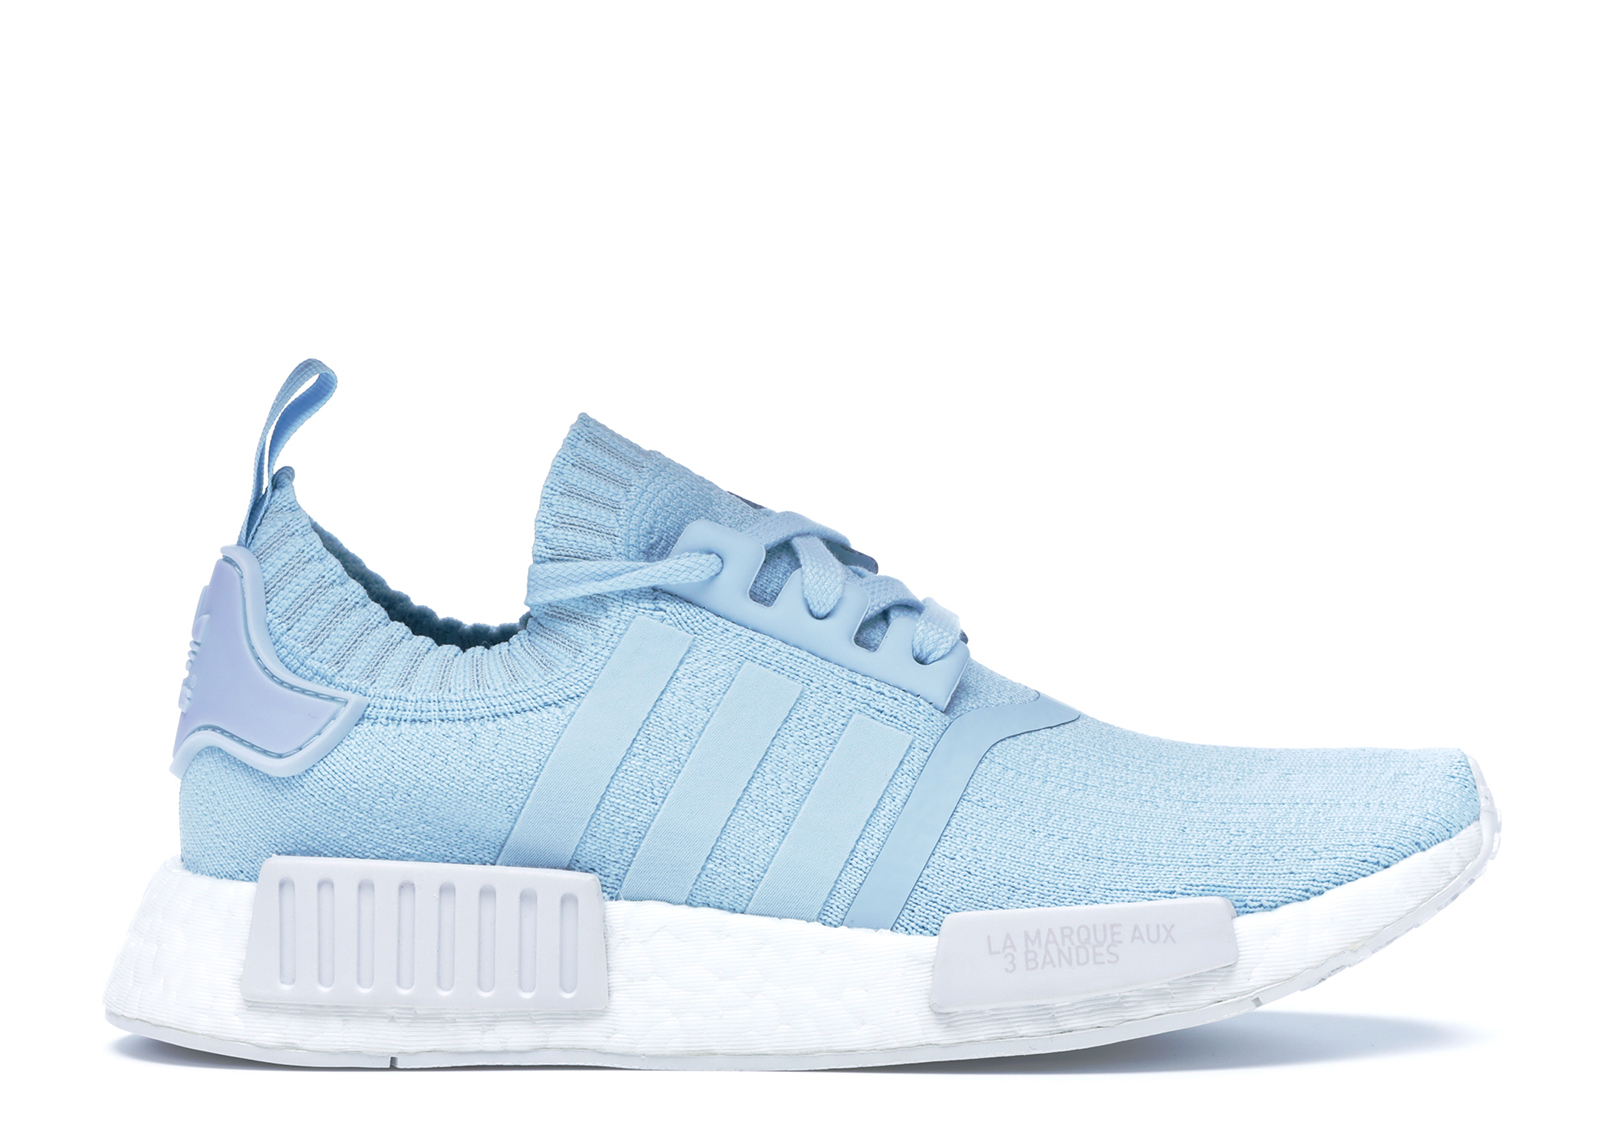 adidas NMD R1 Icey Blue White (W) - BY8763